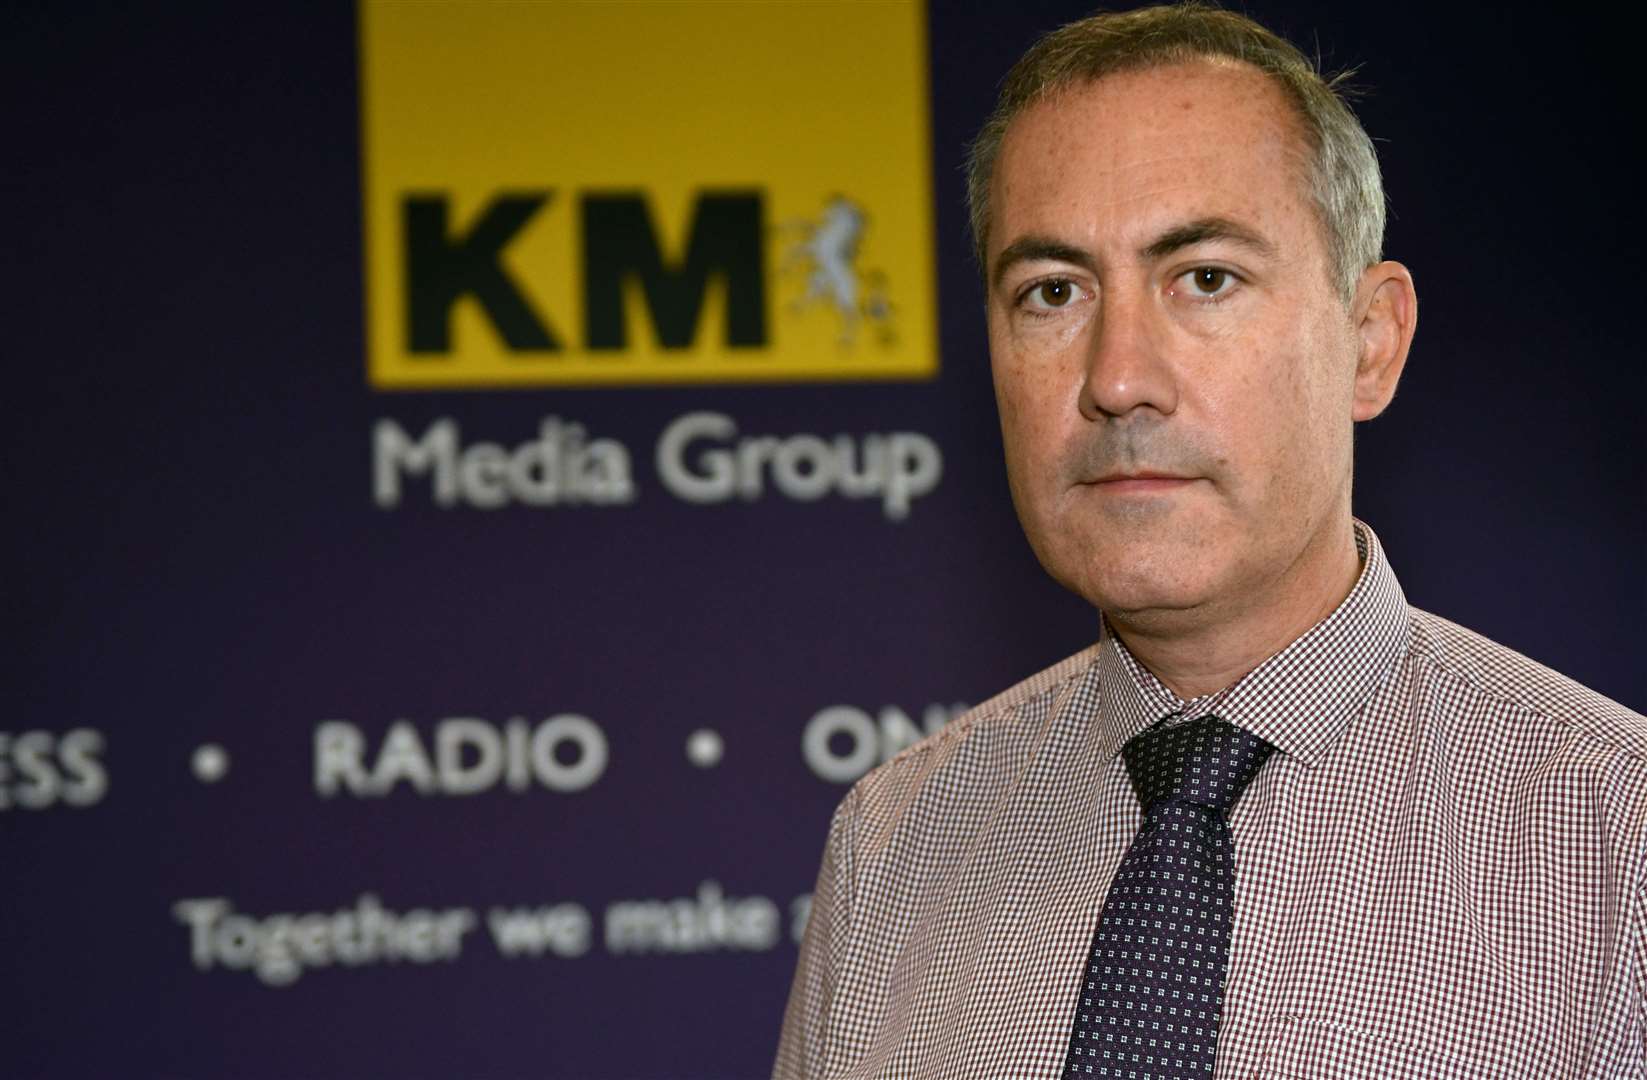 Ian Carter, the editorial director the KM Media Group